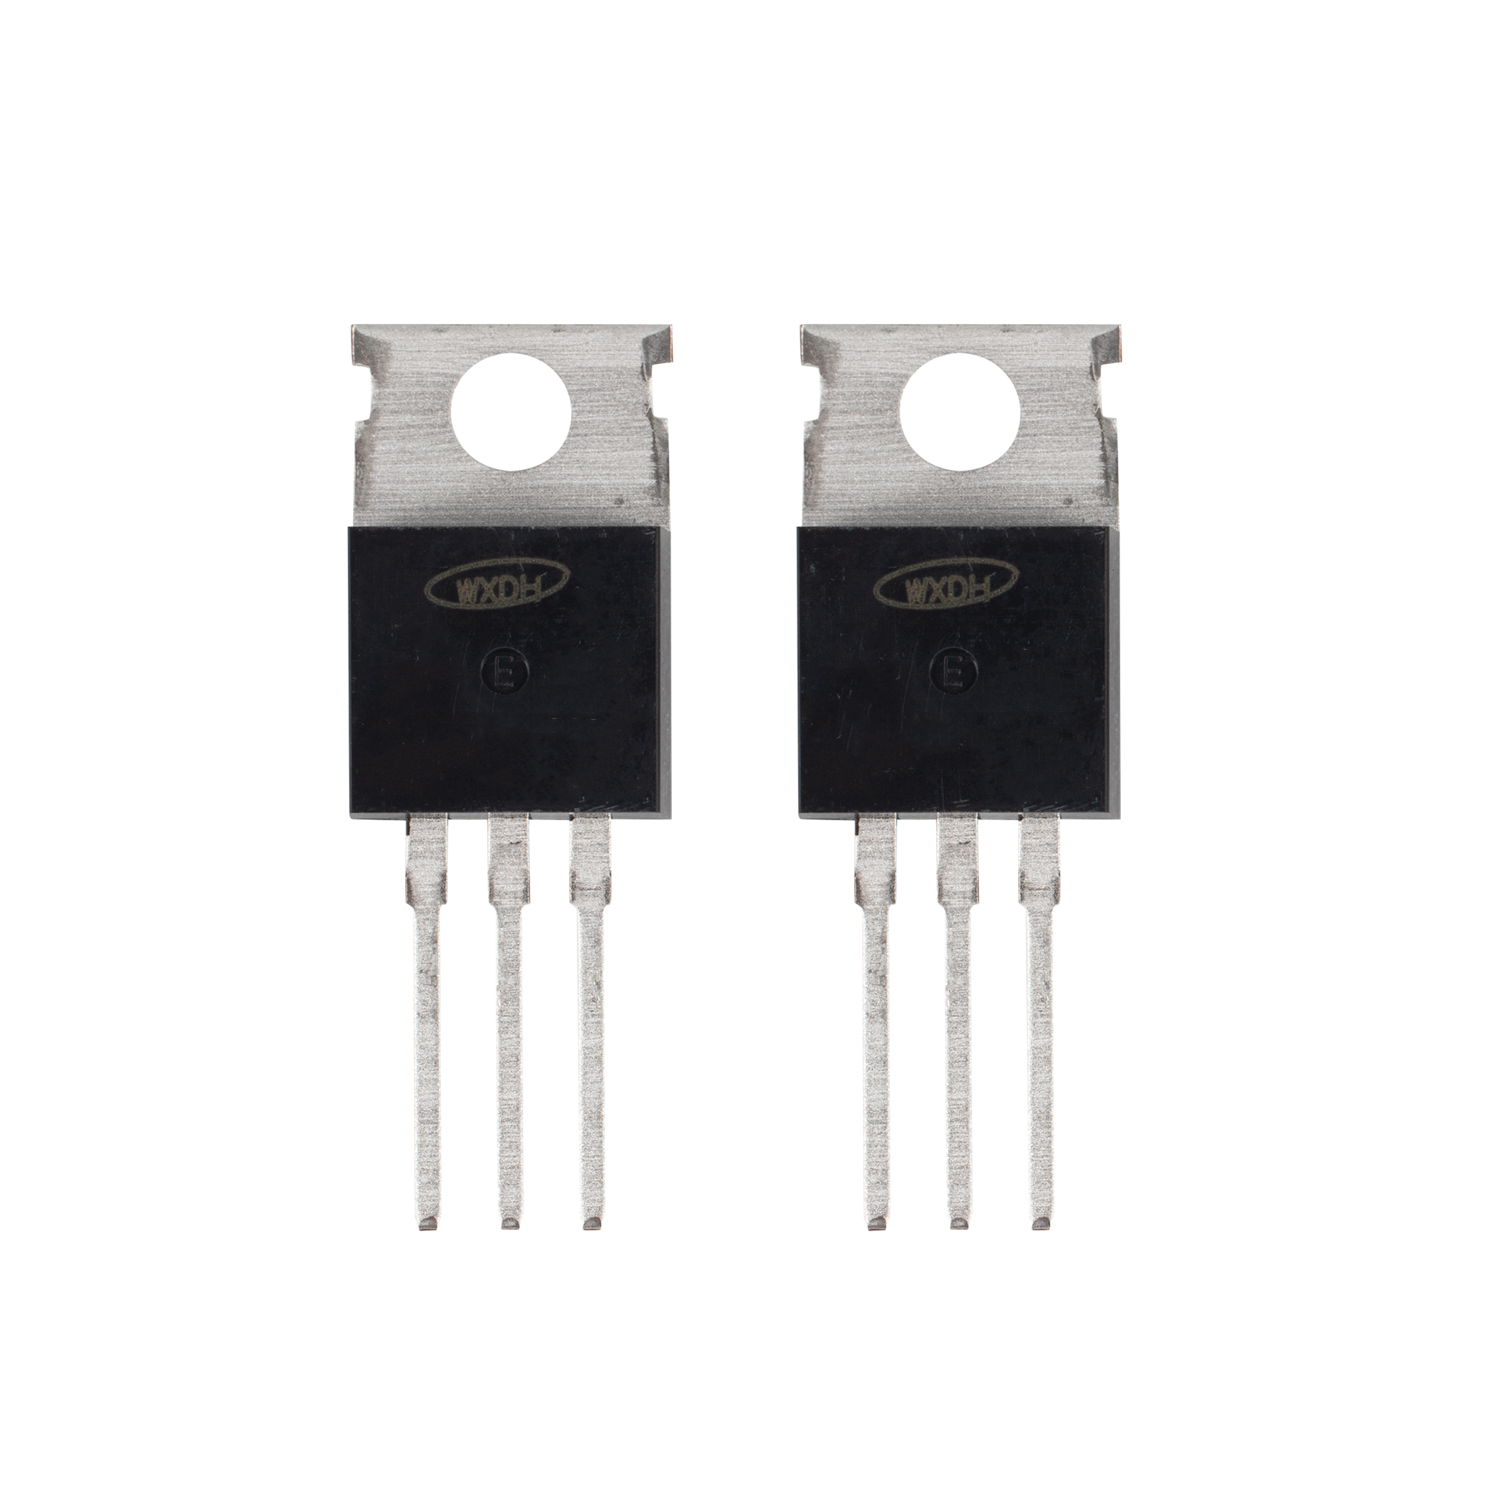 120A 40V N-channel Enhancement Mode Power MOSFET